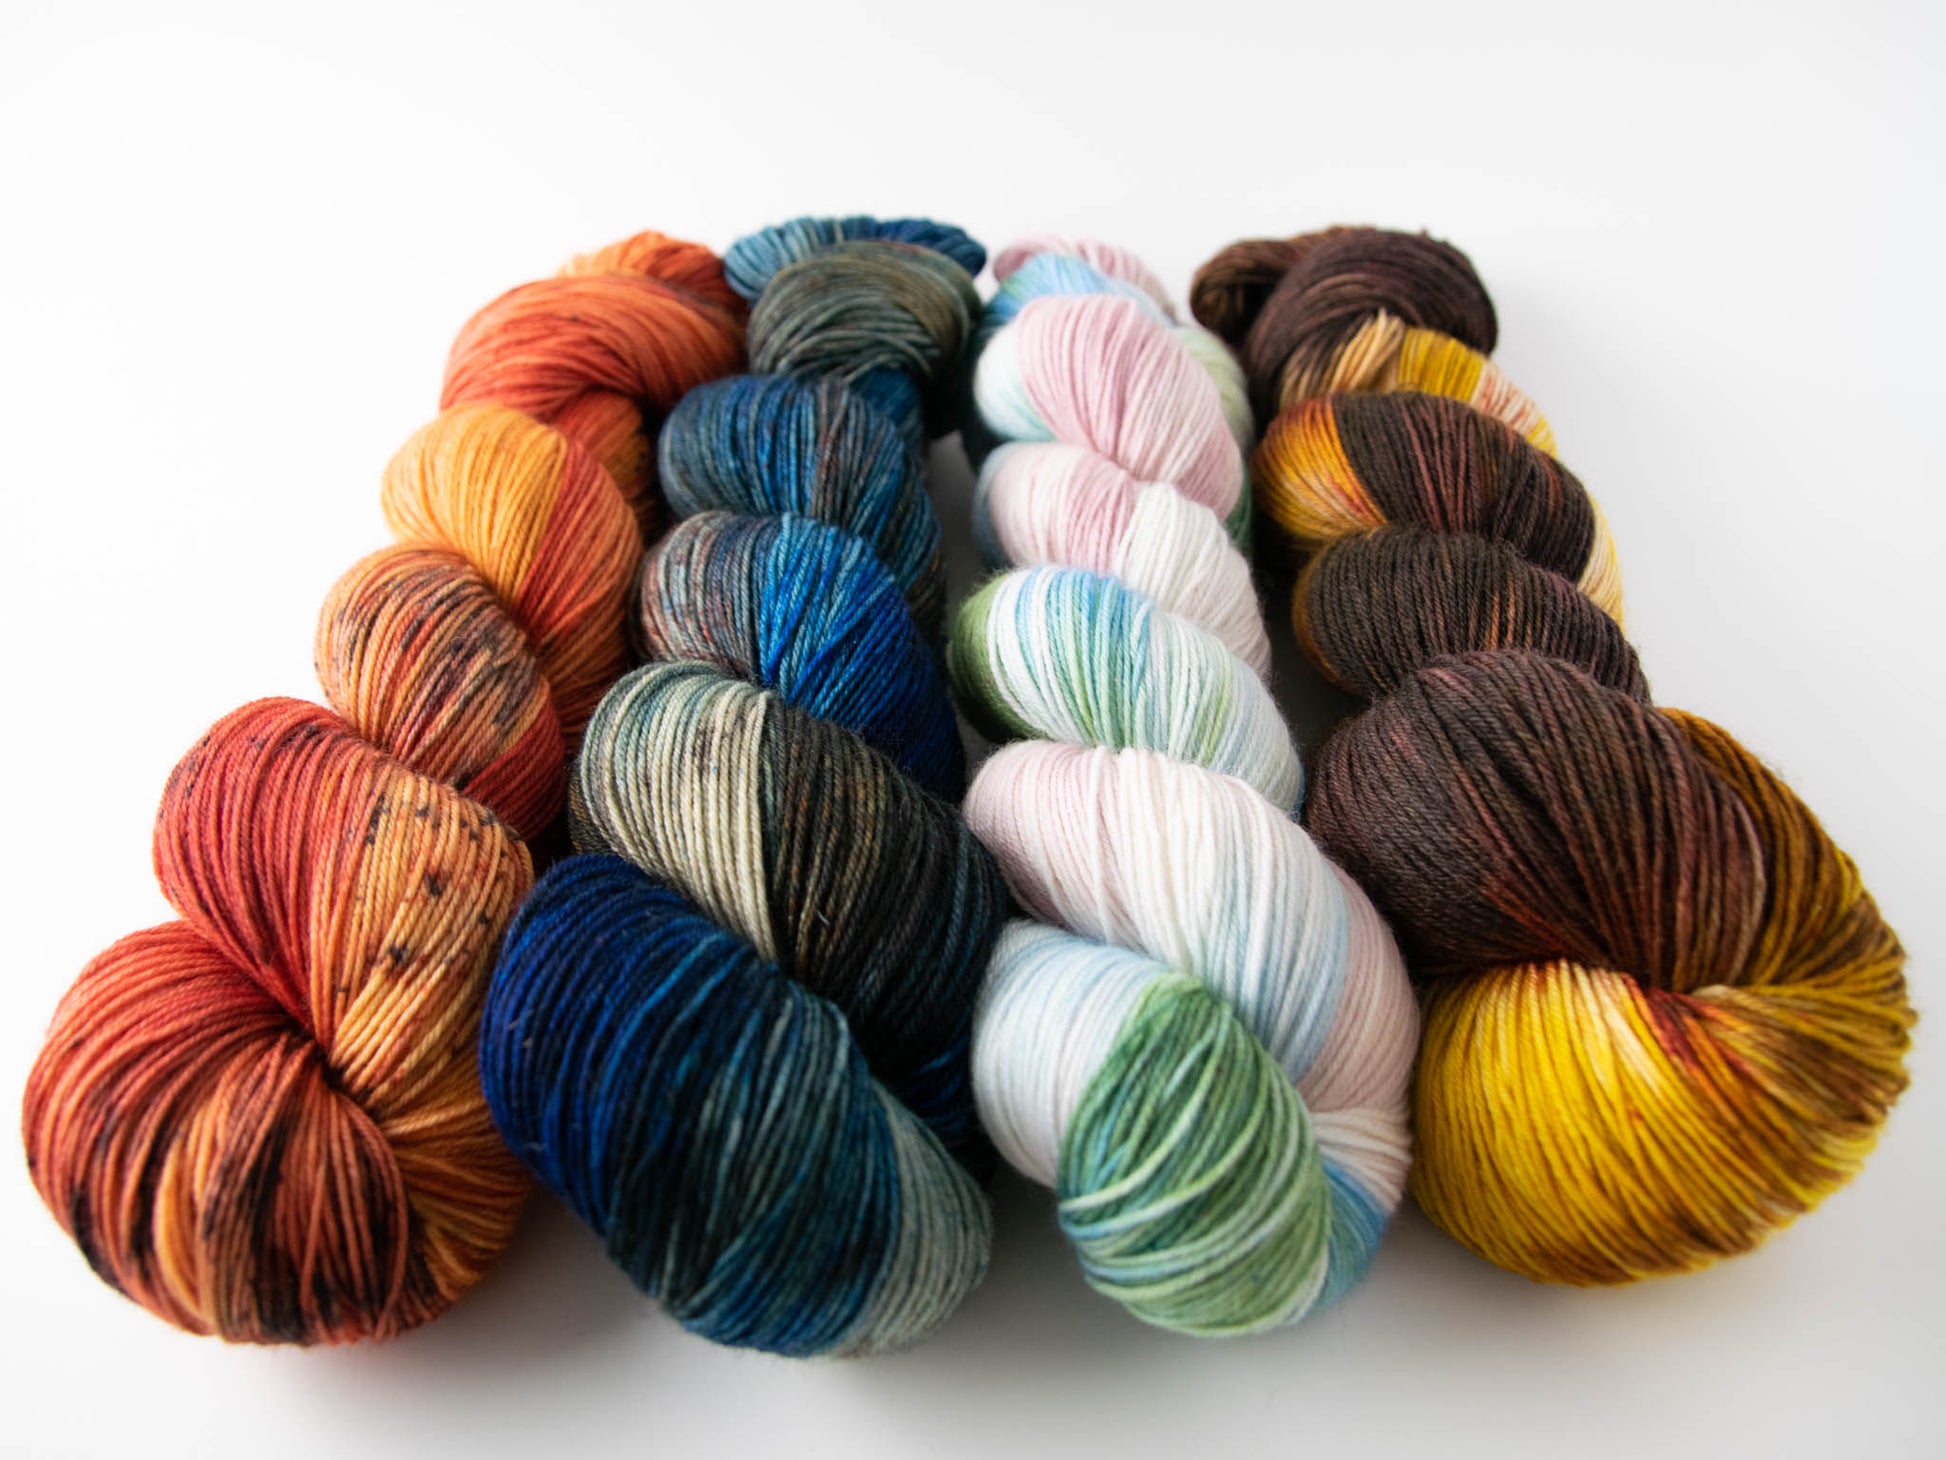 The four variegated colorways in the collection: red and orange; blue, brown, and orange; green, blue, pink, and white; brown, yellow, and orange.